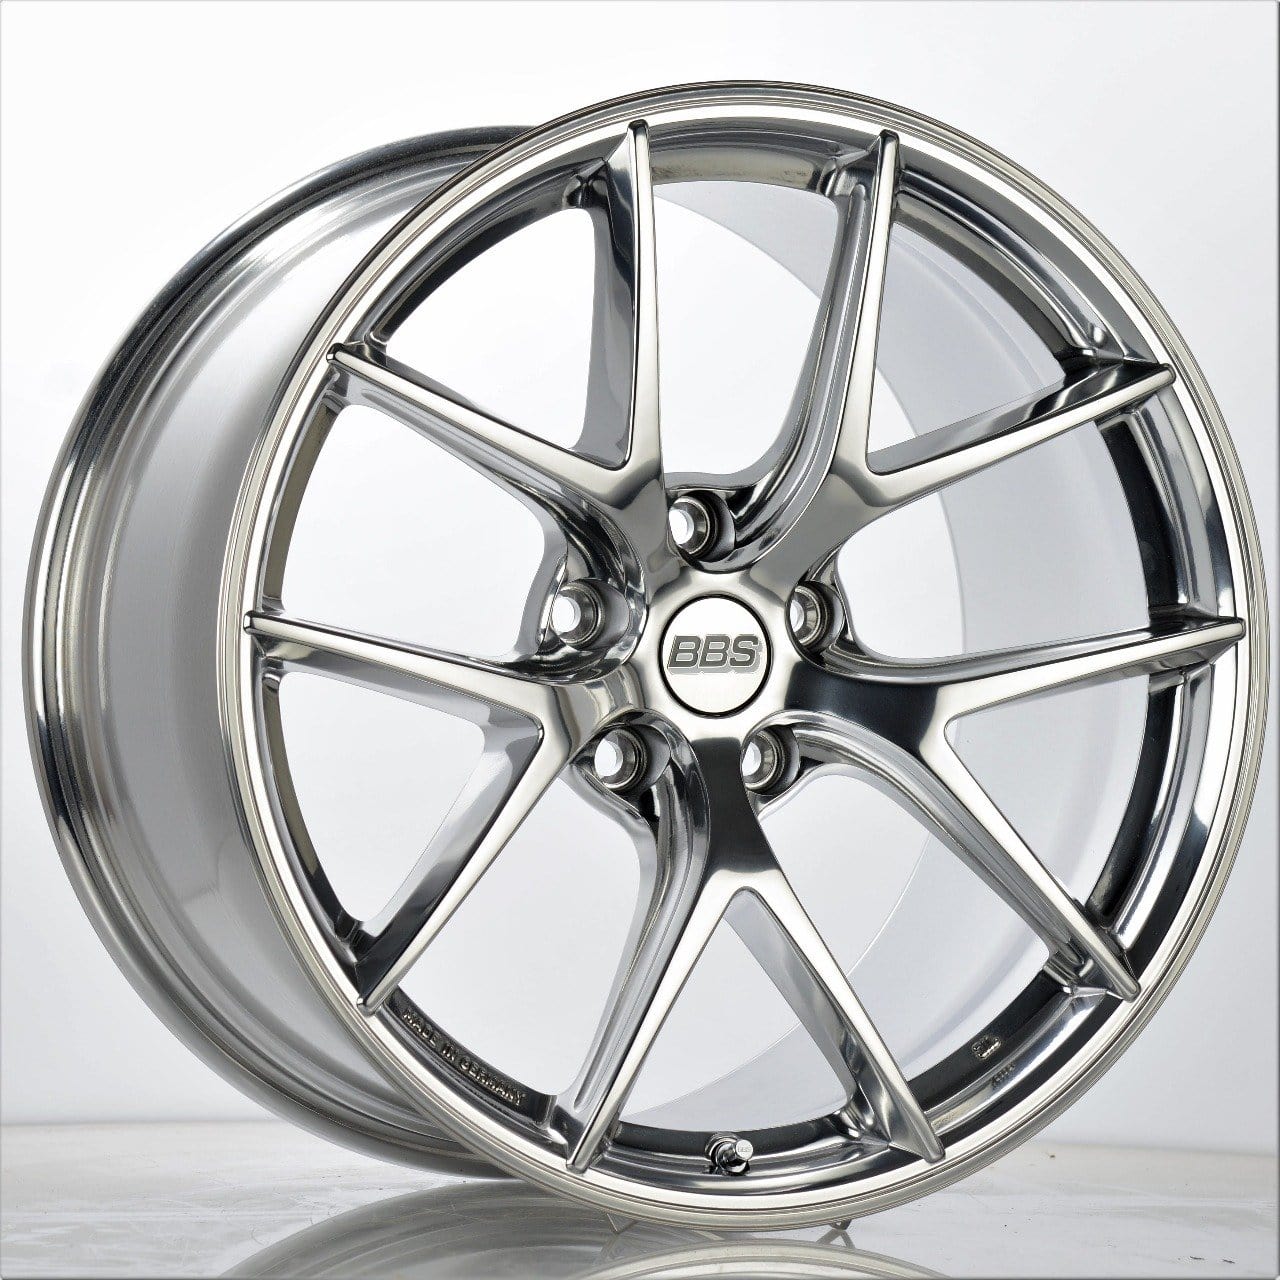 BBS CI-R Wheels in Ceramic Polish finish for C8 Corvette [50-4-015]. Lightweight, durable, and TÜV certified. Upgrade your ride with ACS Composite.